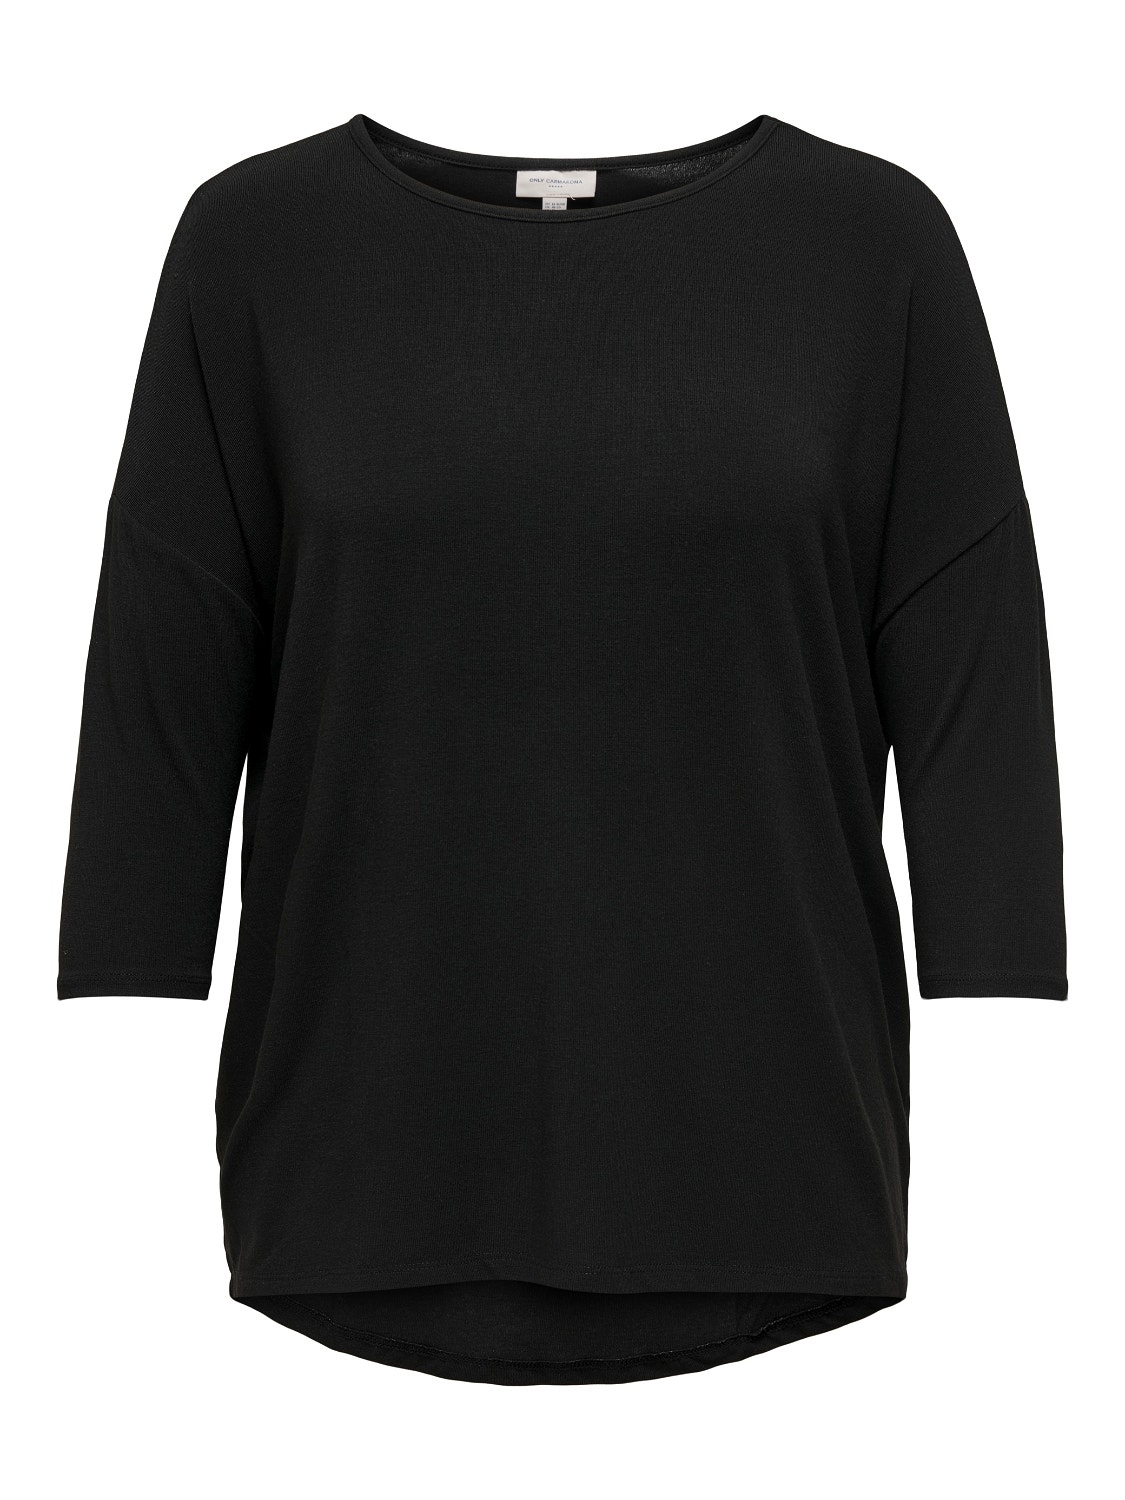 ONLY Curvy loose fitted 3/4 sleeved top -Black - 15229806